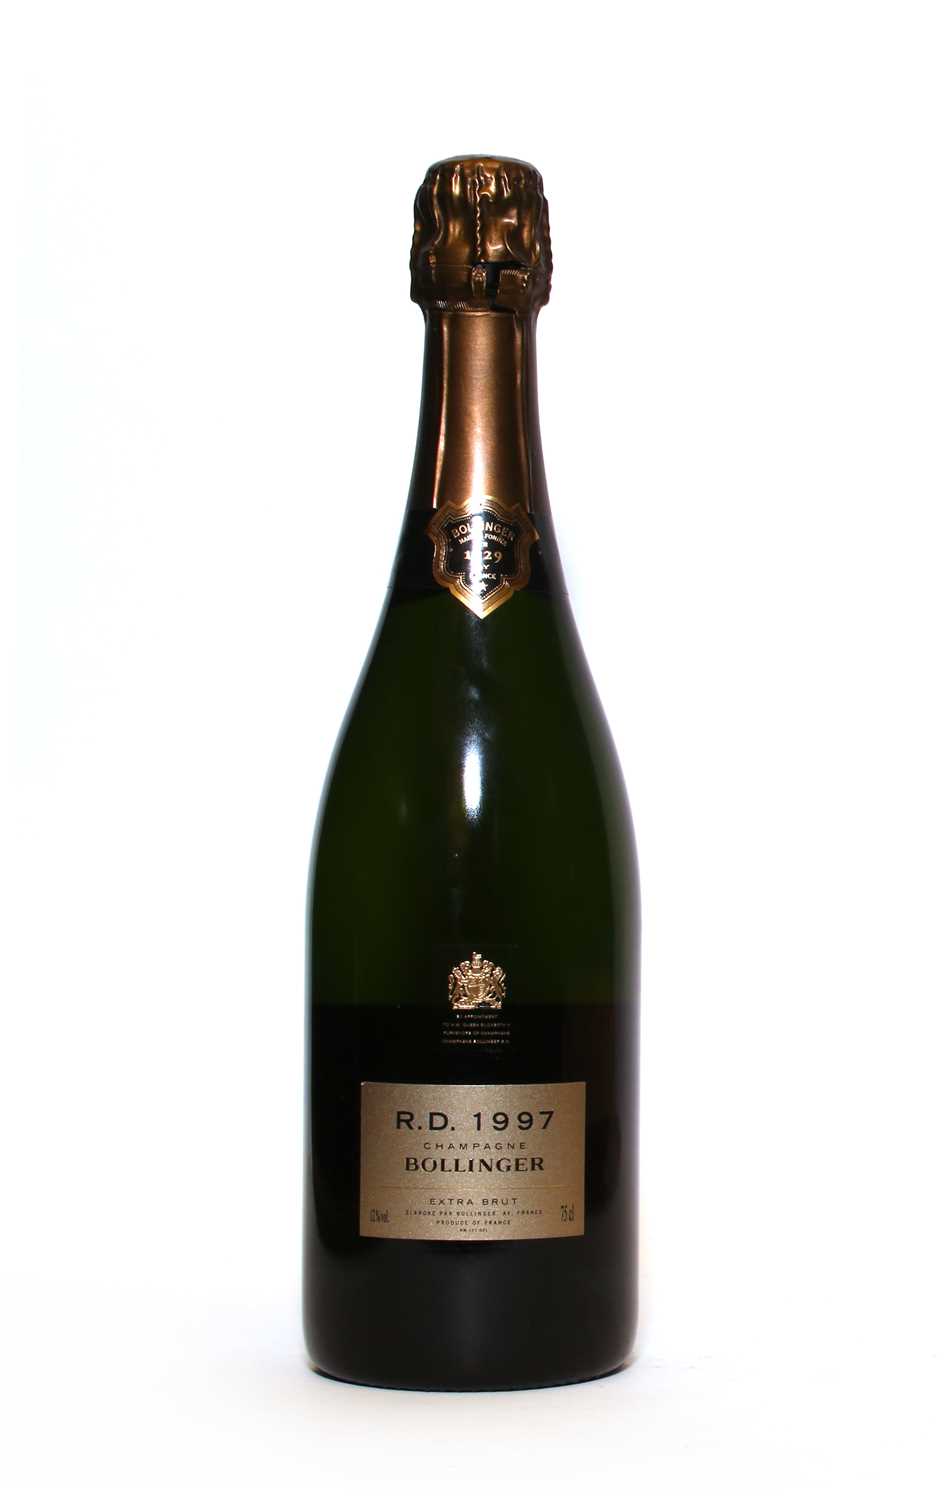 Lot 13 - Bollinger, R.D. Extra Brut, Ay, 1997, one bottle (OWC)